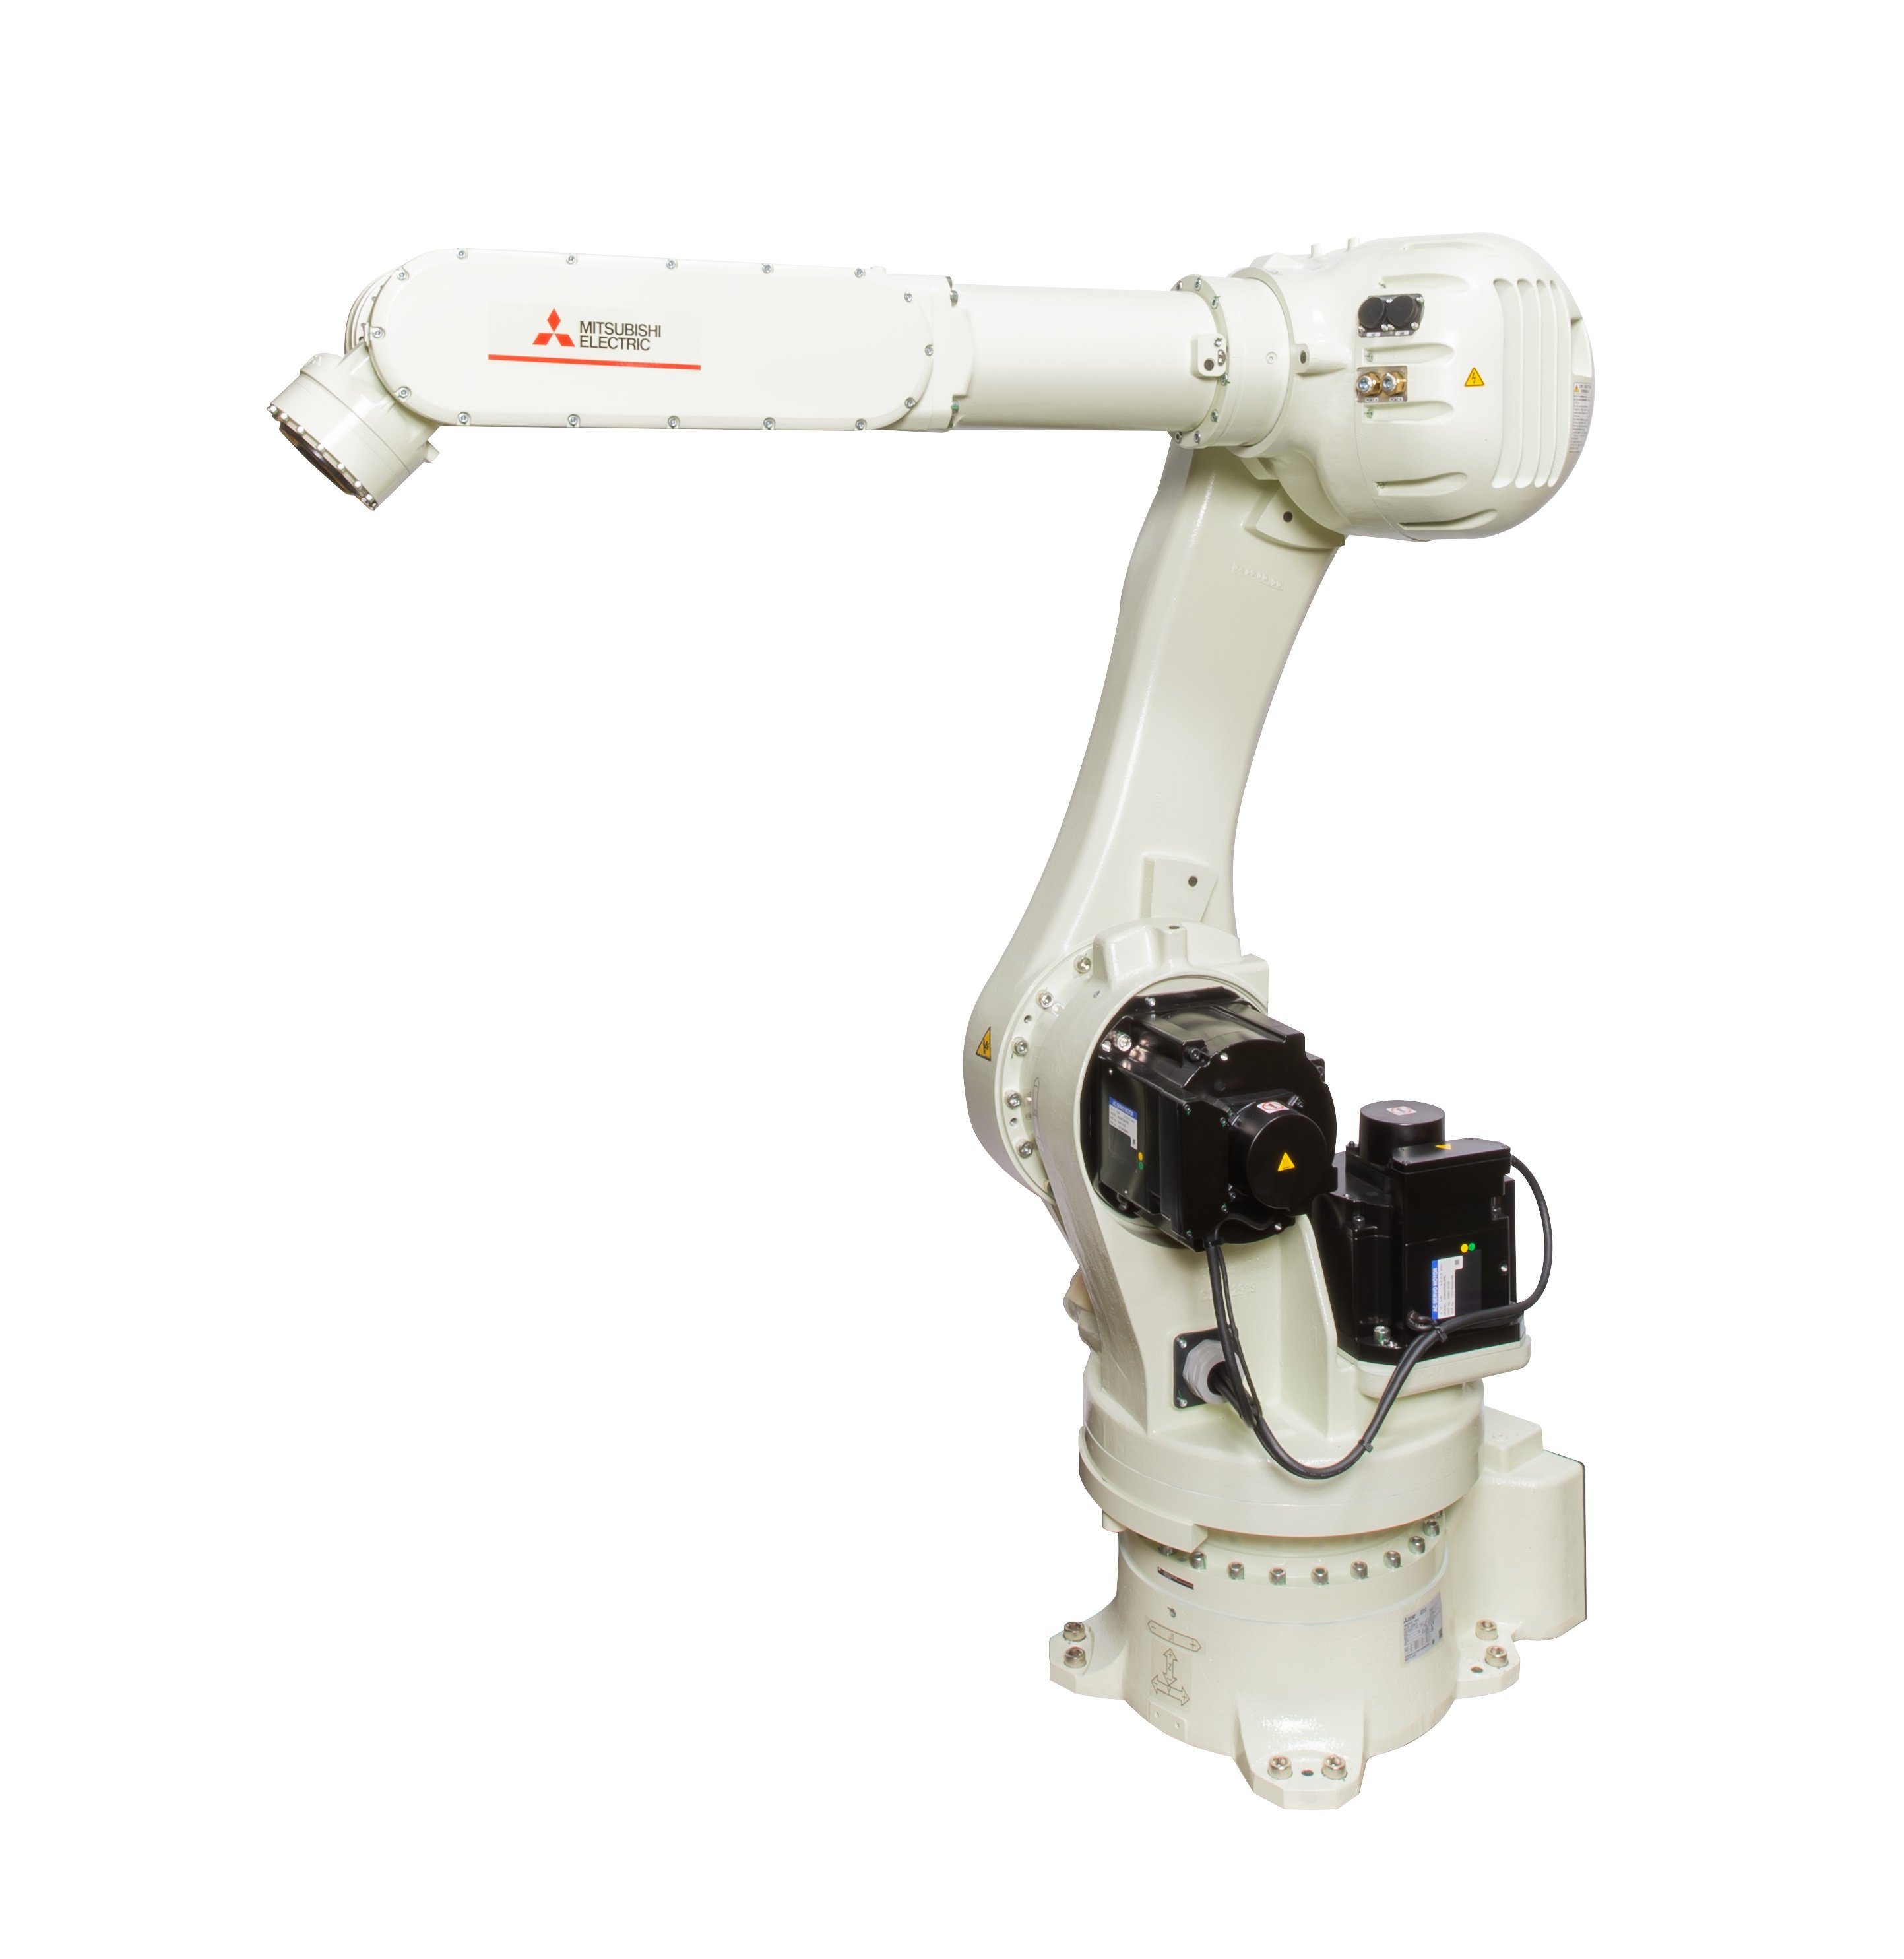 Mitsubishi Electric’s RV-35/50/80FR series robots feature a high payload and long reach